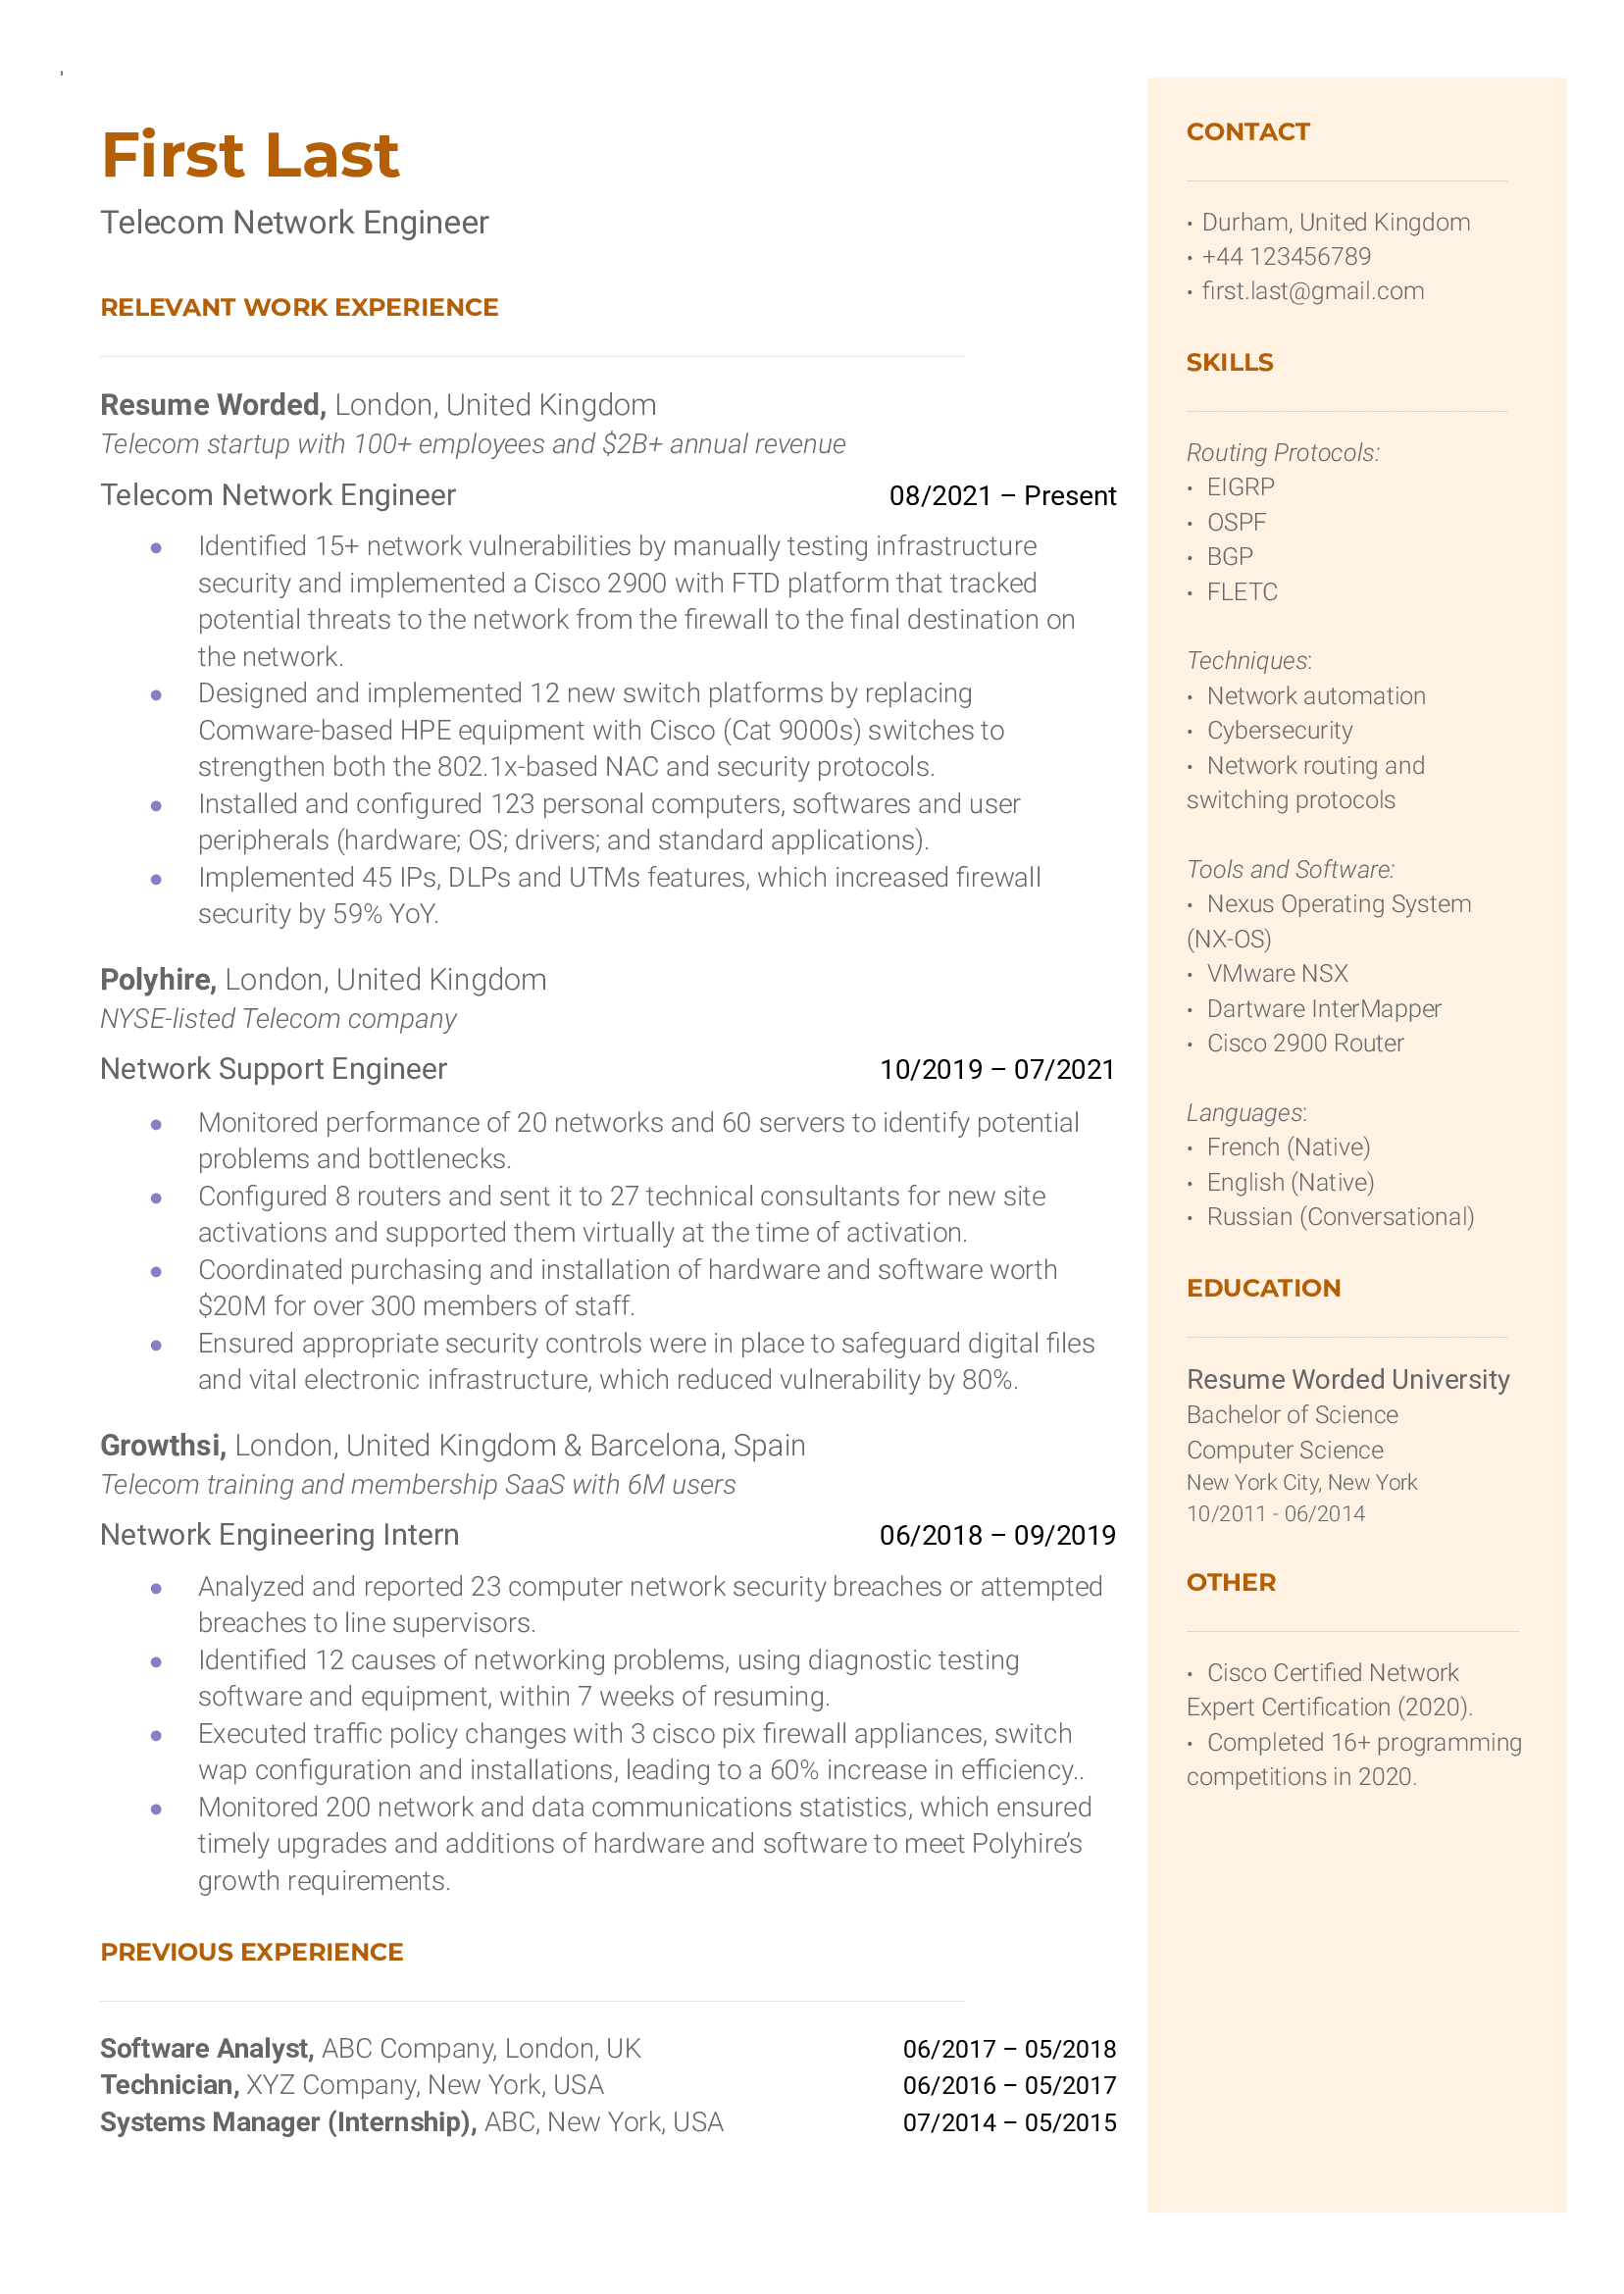 Telecom Network Engineer's CV demonstrating technical skills and quantified achievements.